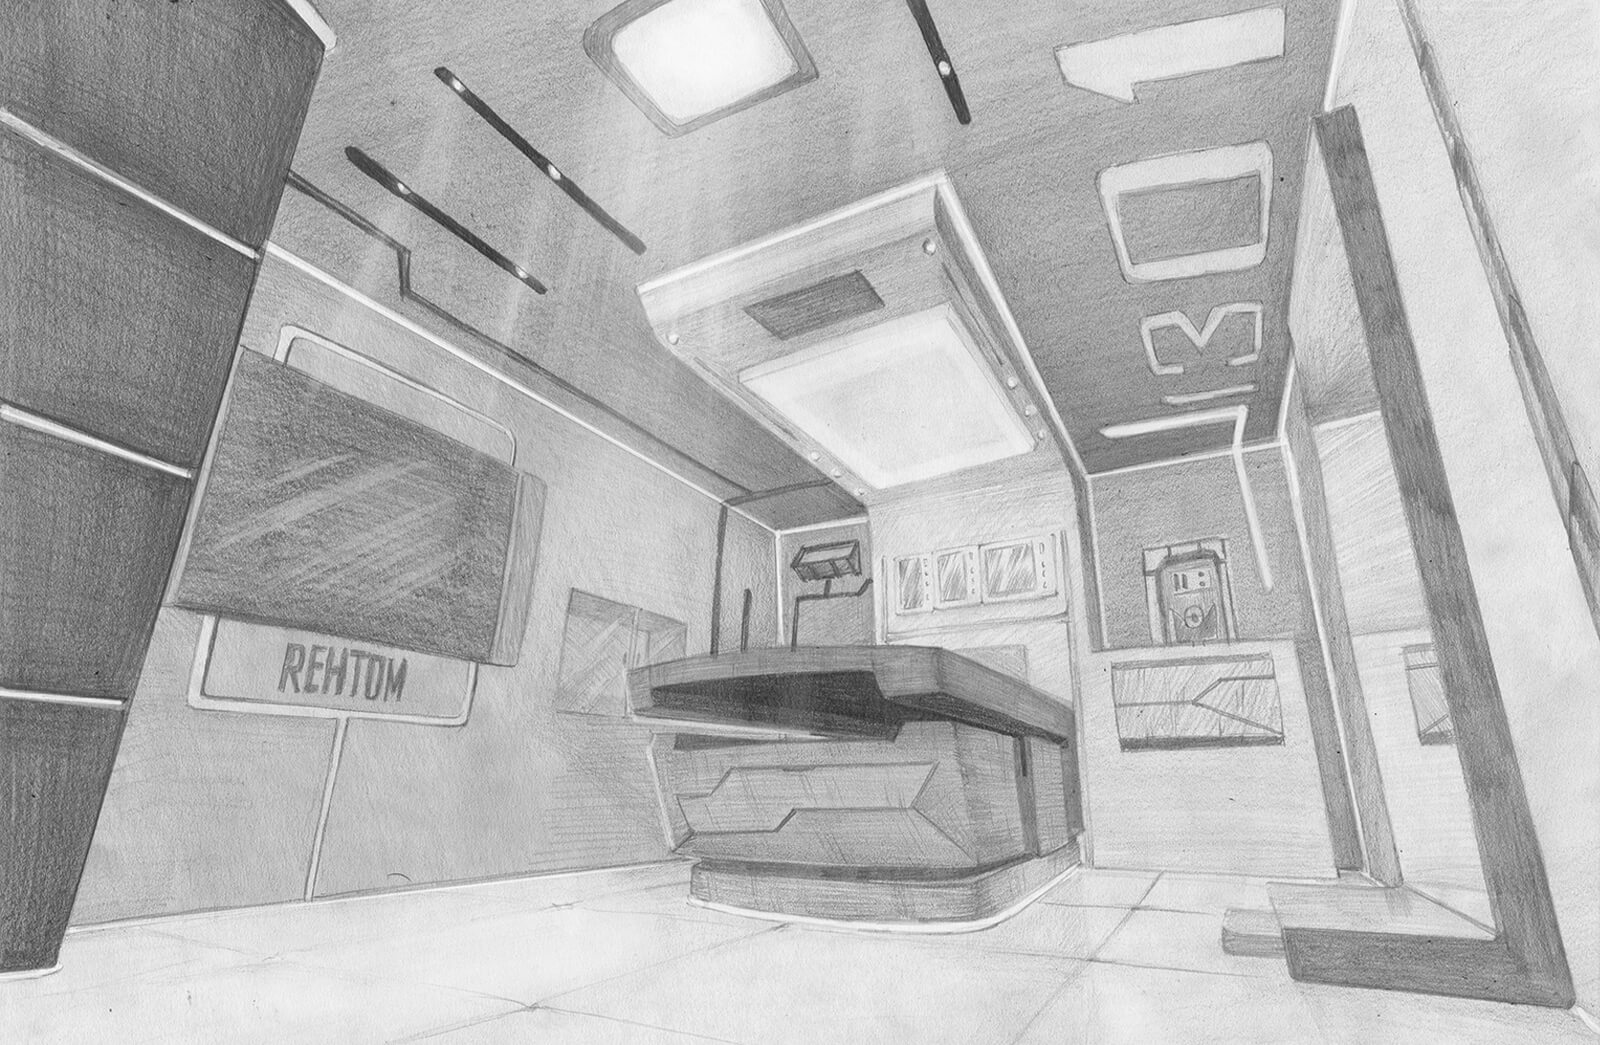 Black-and-white drawing of a futuristic medical bay with an examining table, wall displays and lighting